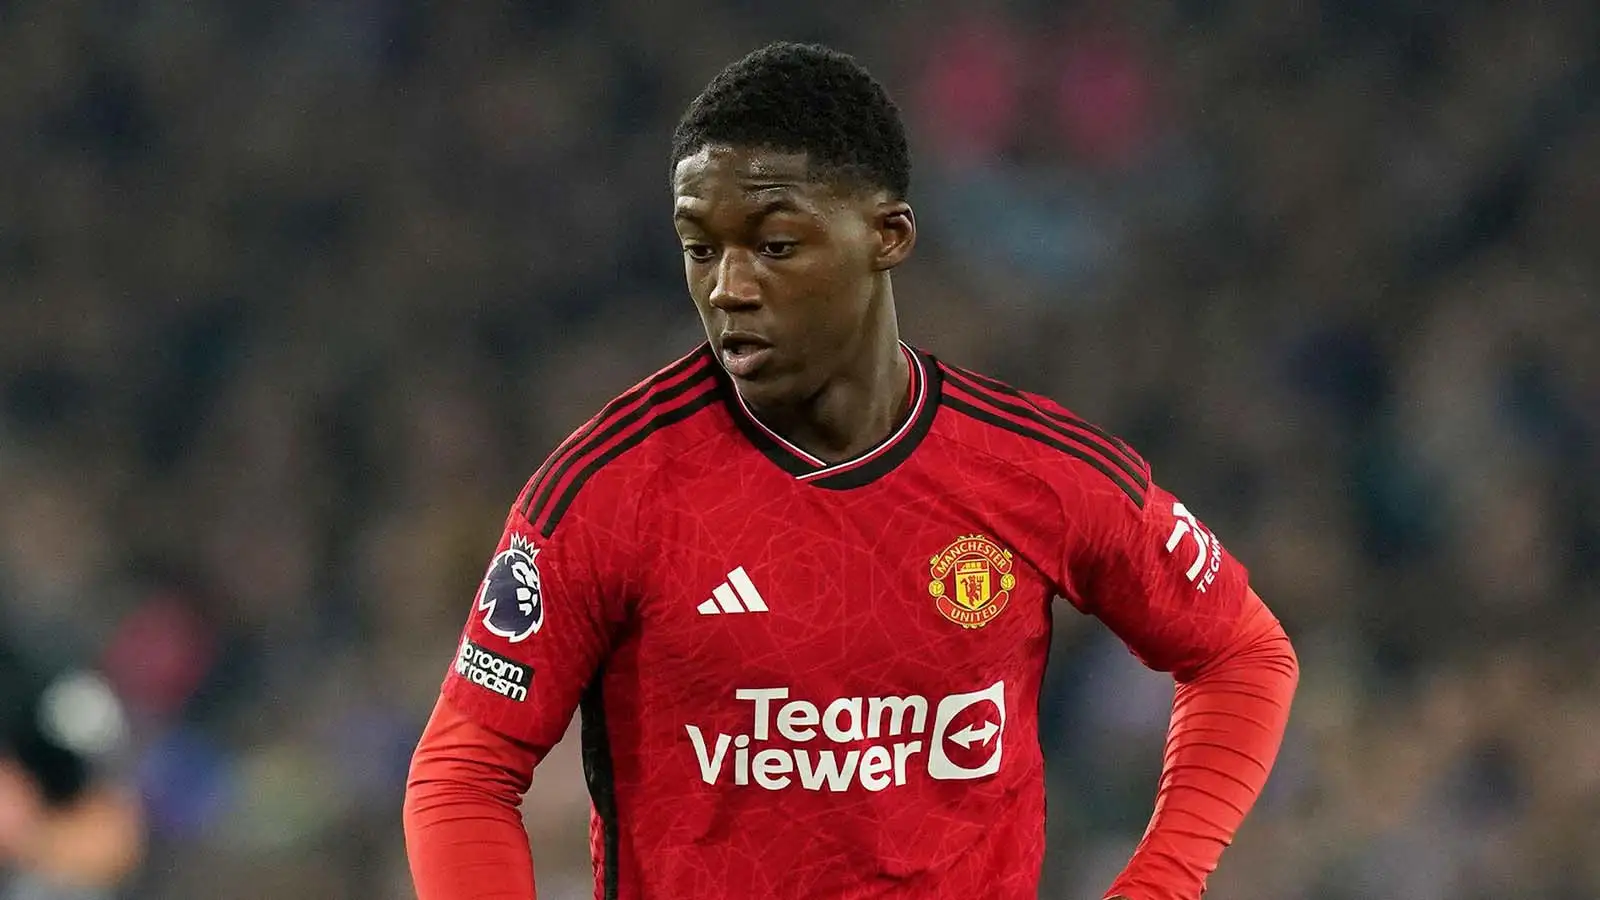 ‘So composed, so graceful’: What Keane, Neville & others said about Kobbie Mainoo’s ‘unbelievable’ Man Utd debut